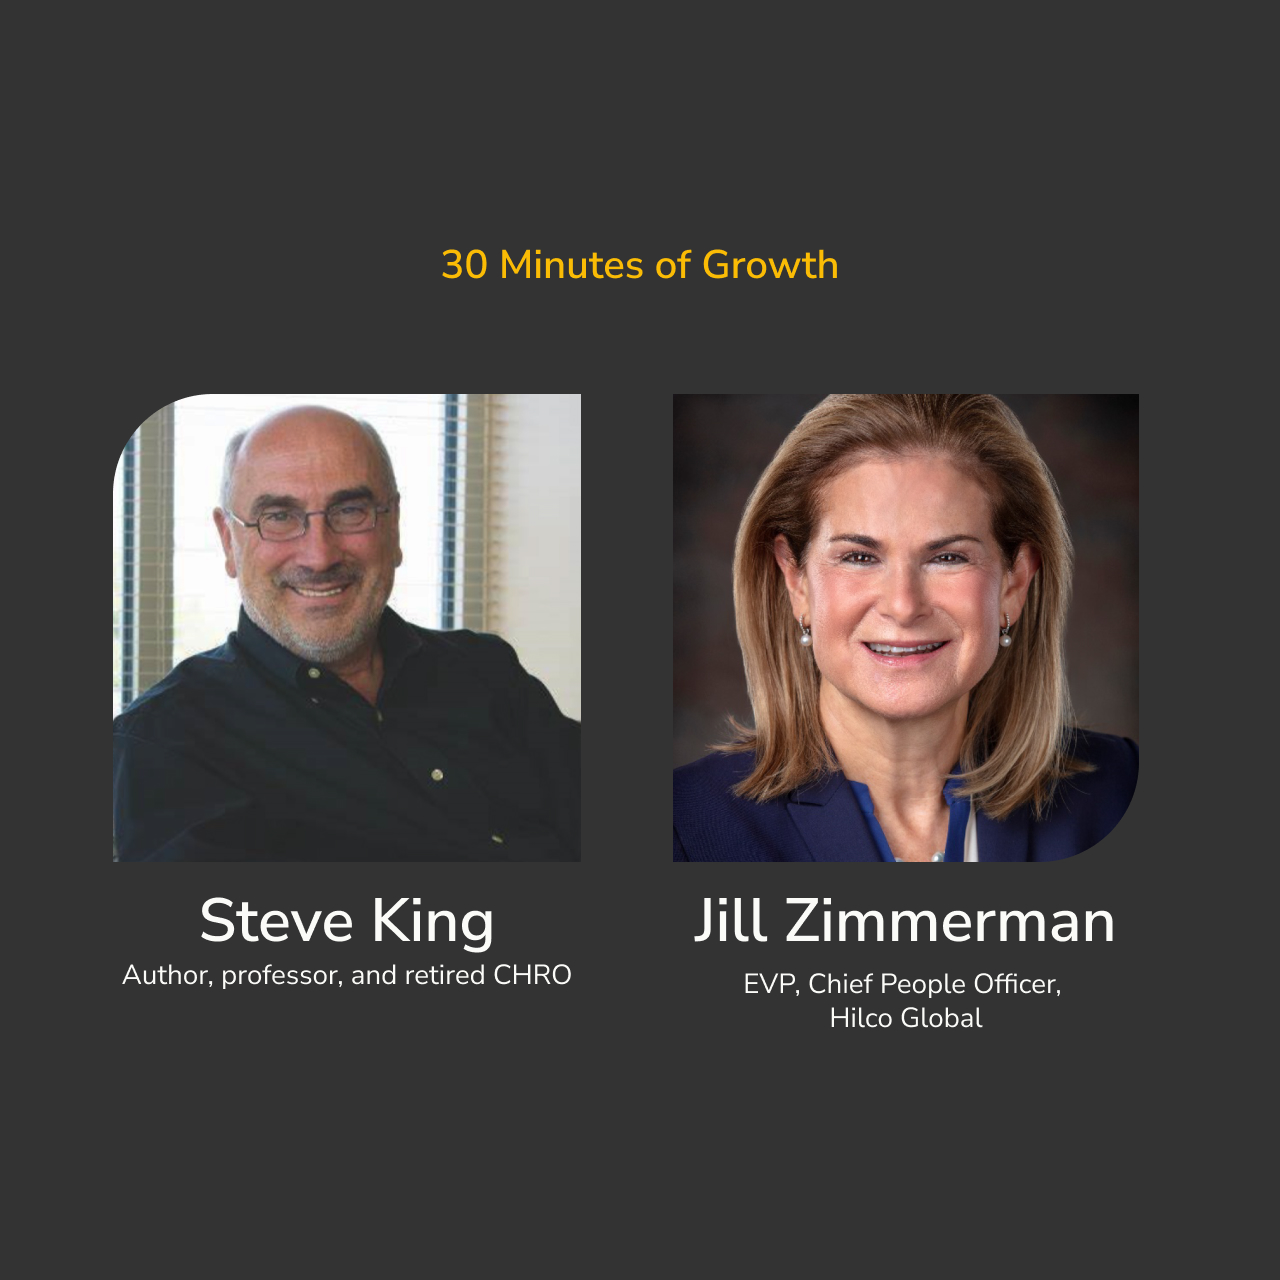 Change management decoded: 10 key takeaways from the webinar with Jill Zimmerman and Steve King